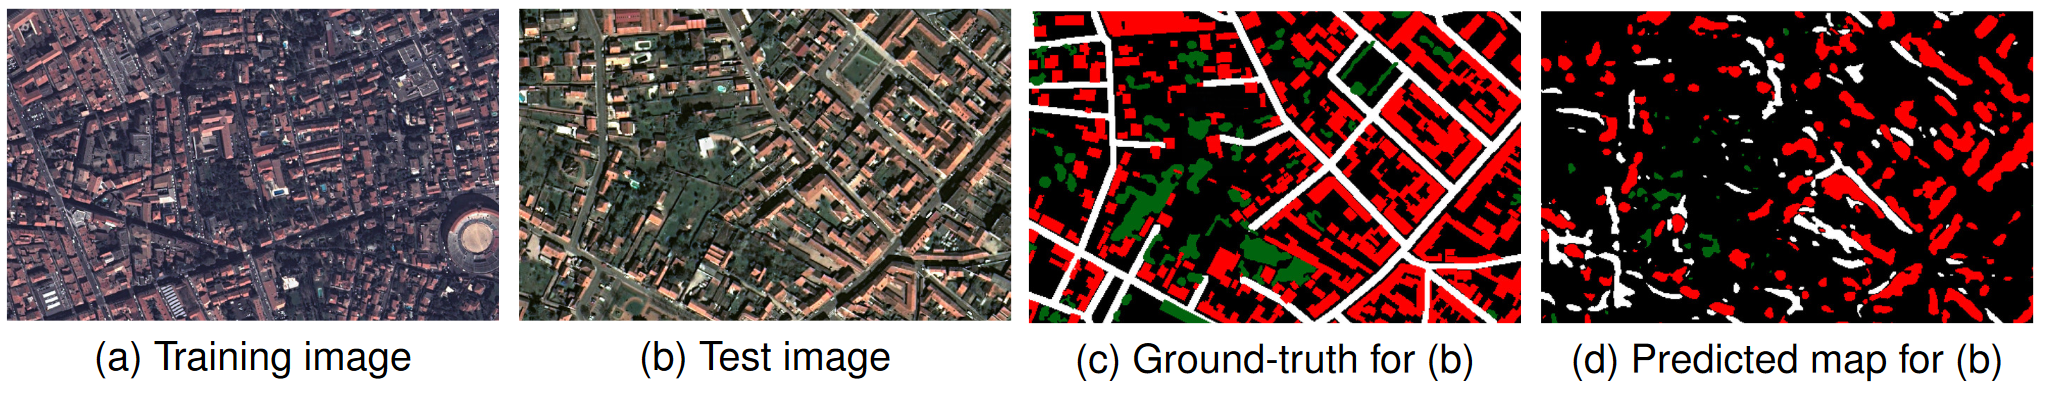 Domain adaptation problem. We depict training (a) and test (b) images, the ground-truth (c) for the test image, and the predicted map by U-net (d). In the ground-truth and in the predicted map, red, green, and white pixels correspond to building, tree, and road classes, respectively.